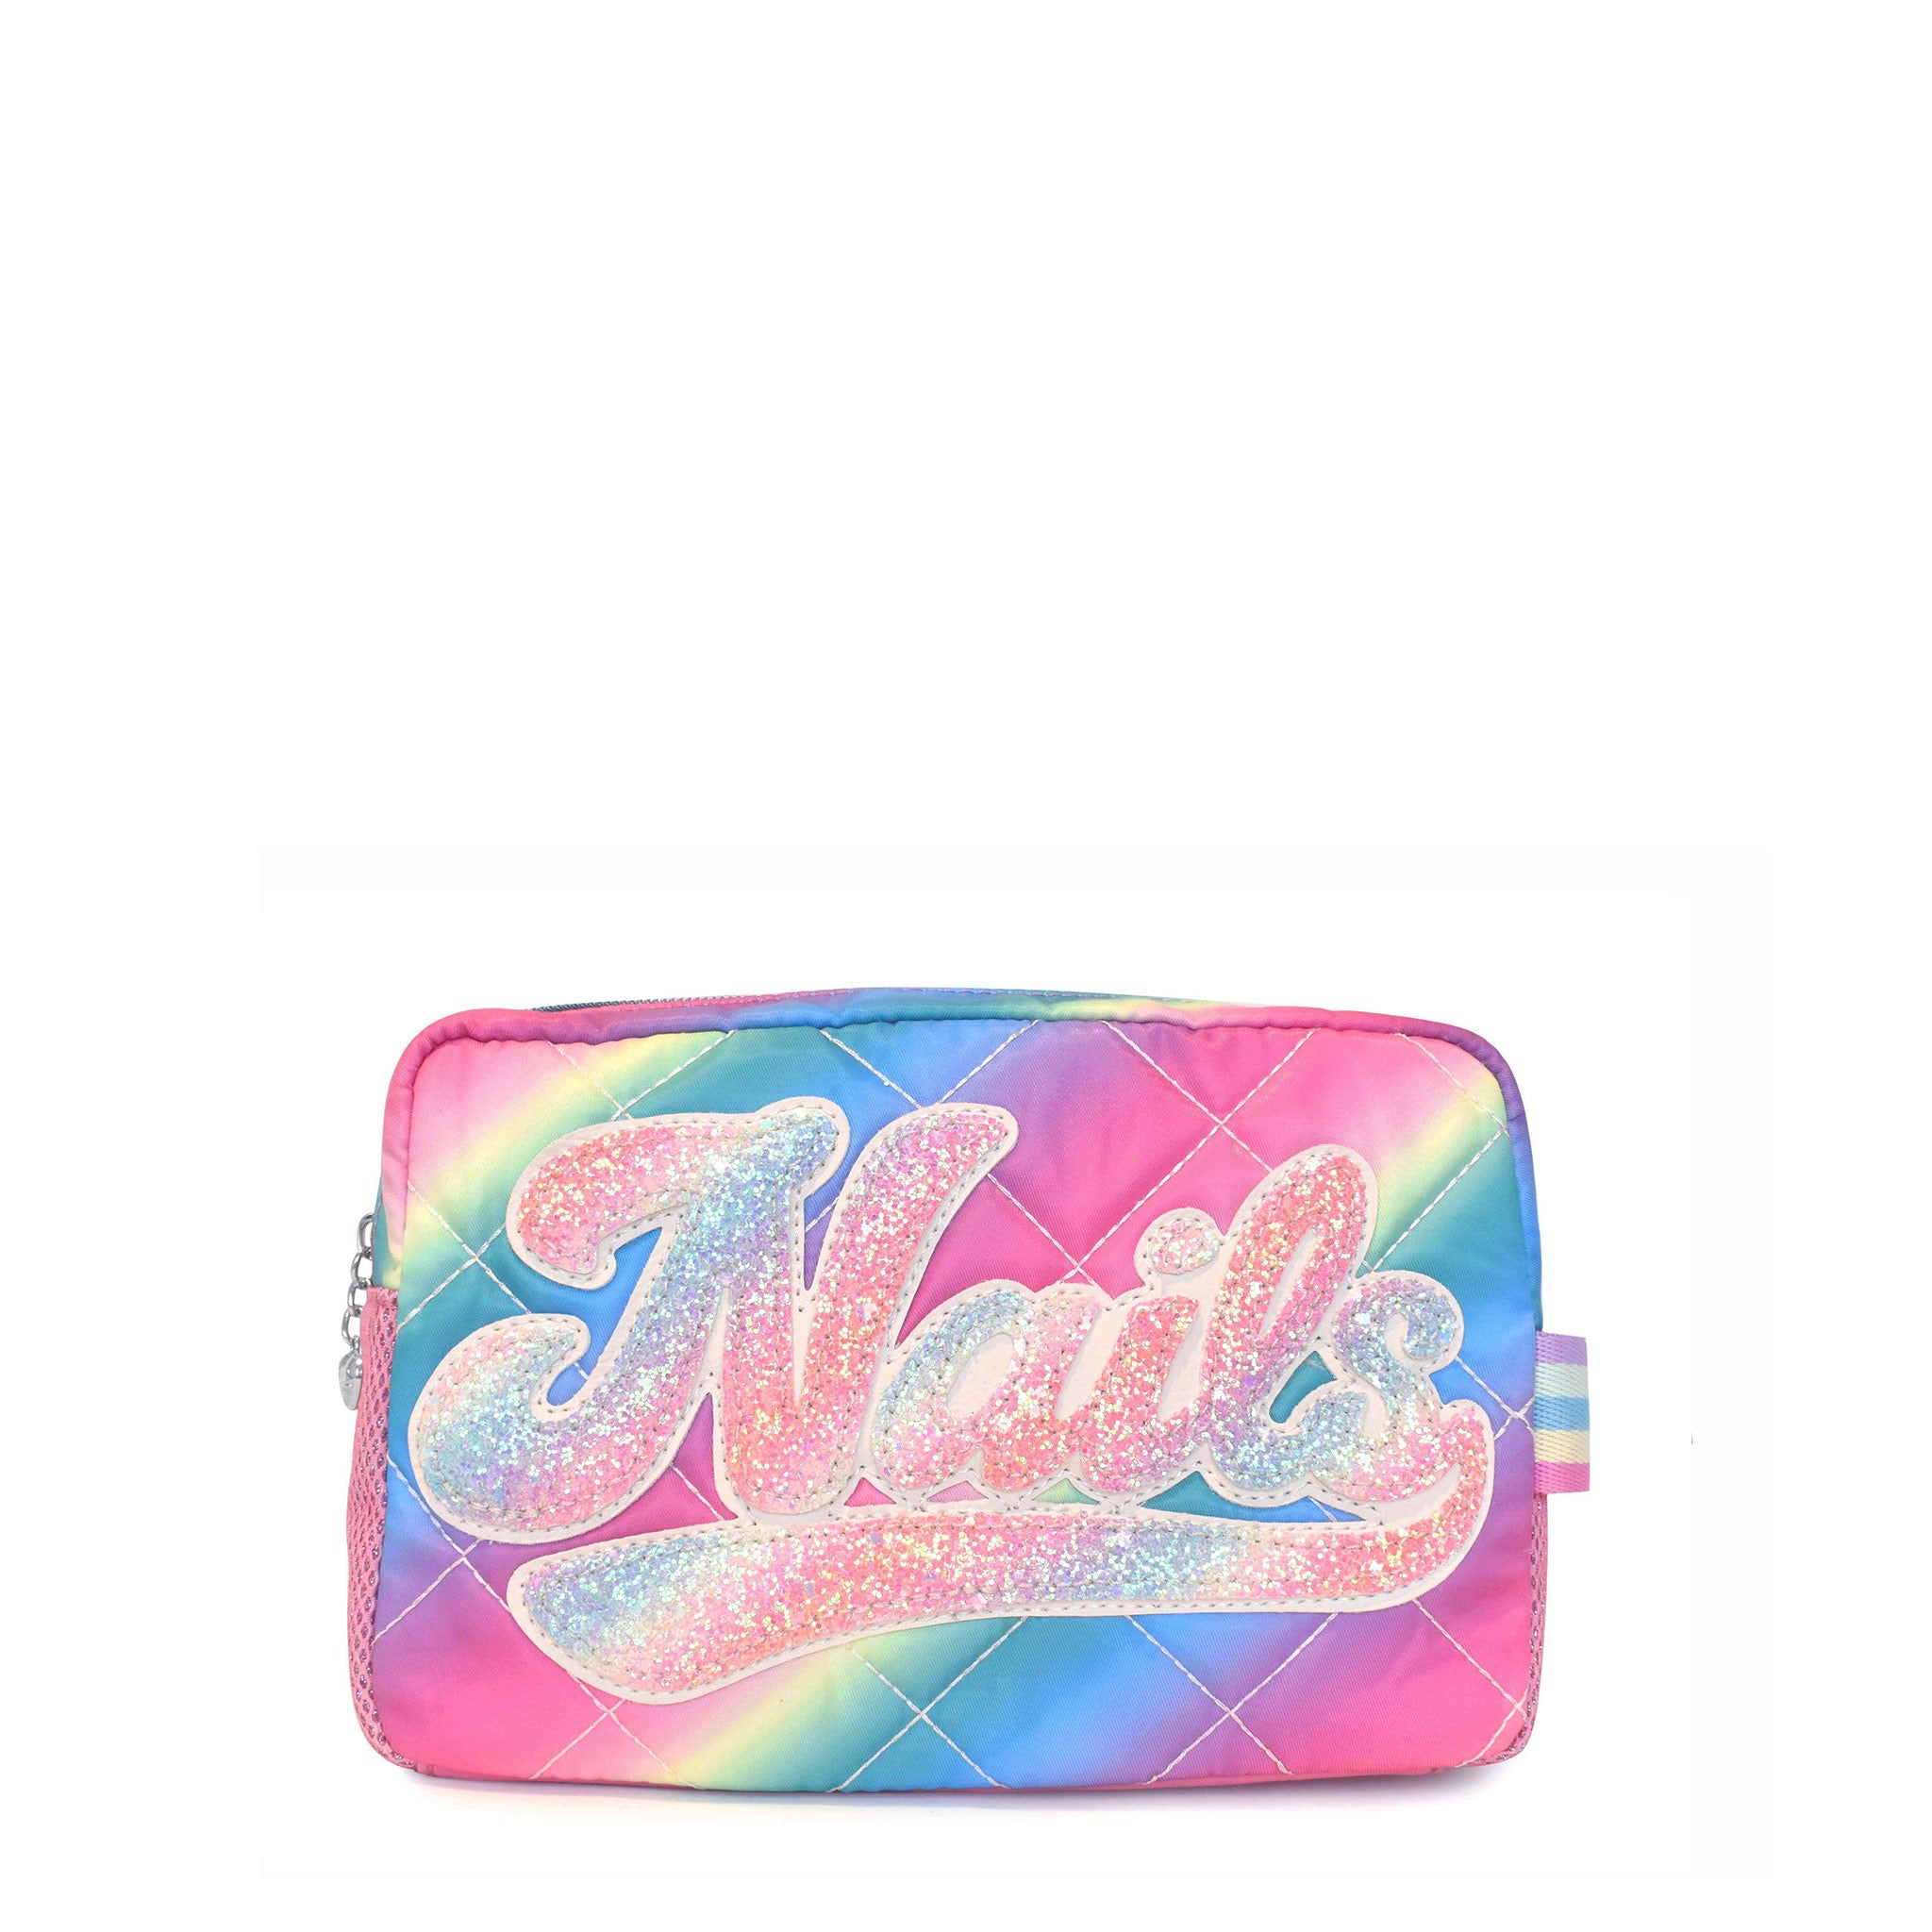 Front view of a rainbow ombre quilted pouch with glitter retro-inspired script 'NAILS' applique